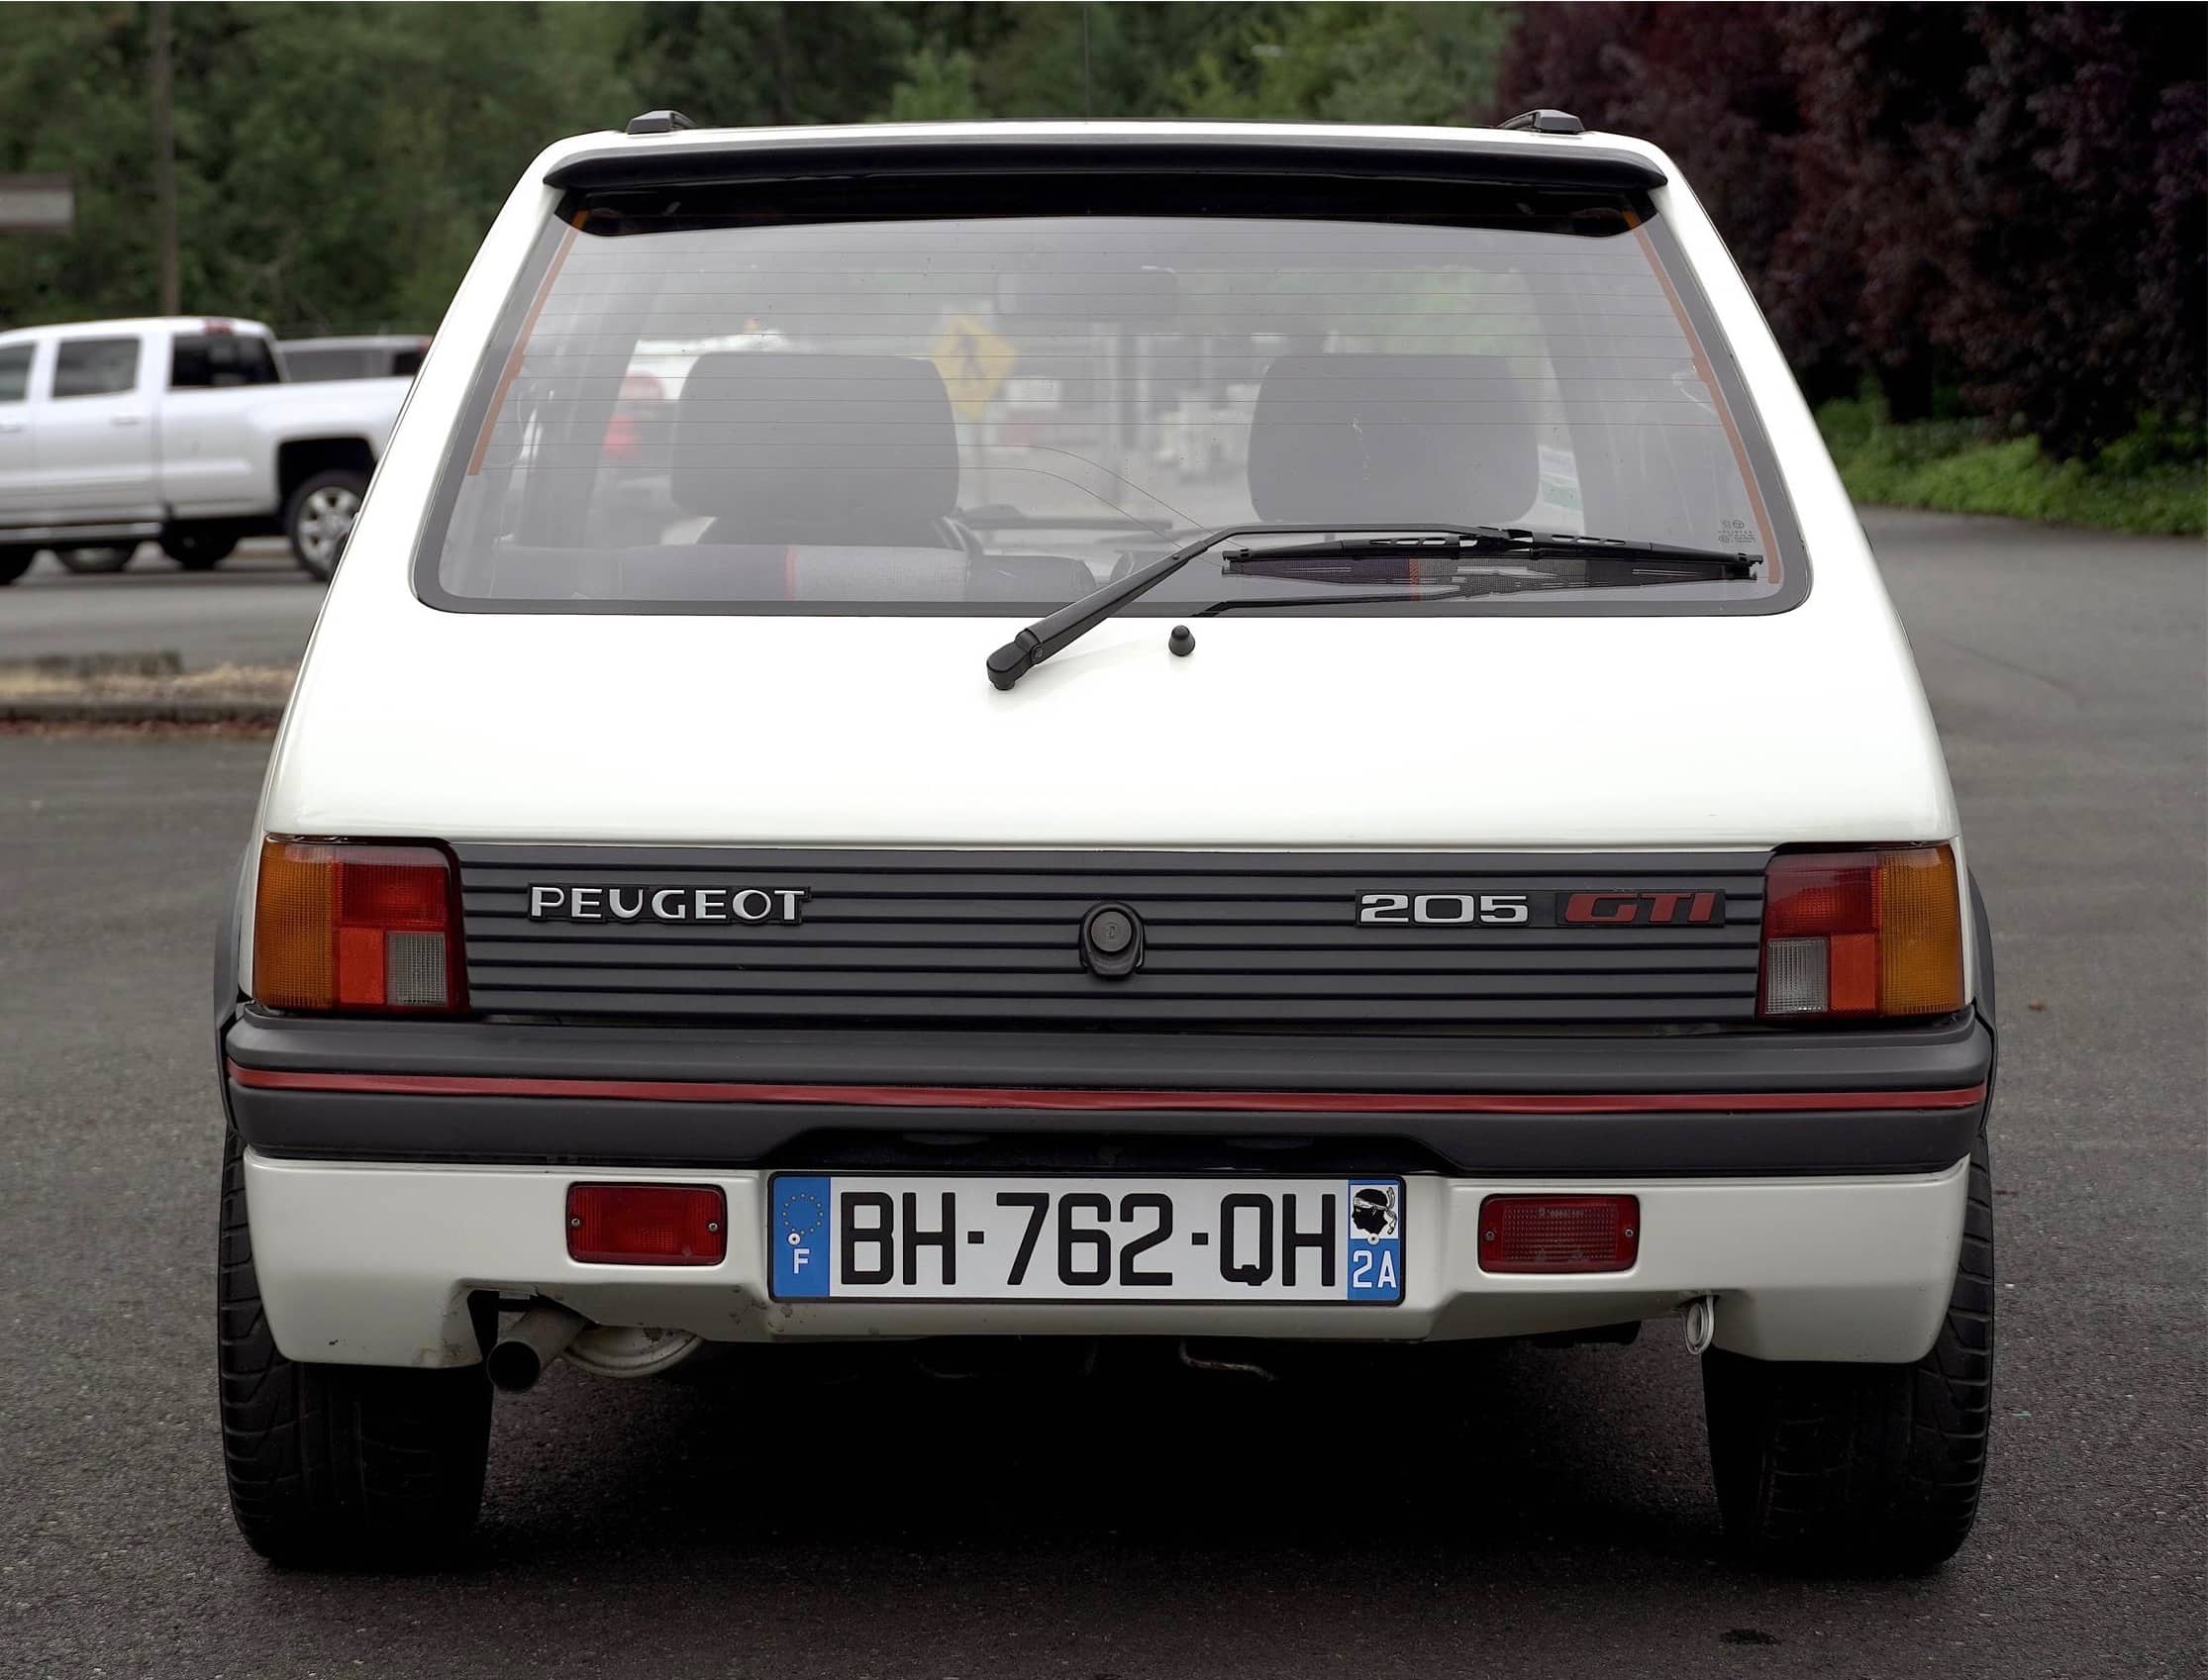 1988 Peugeot 205 GTi, Volkswagen wasn’t the only company making a wonderful GTi, ClassicCars.com Journal